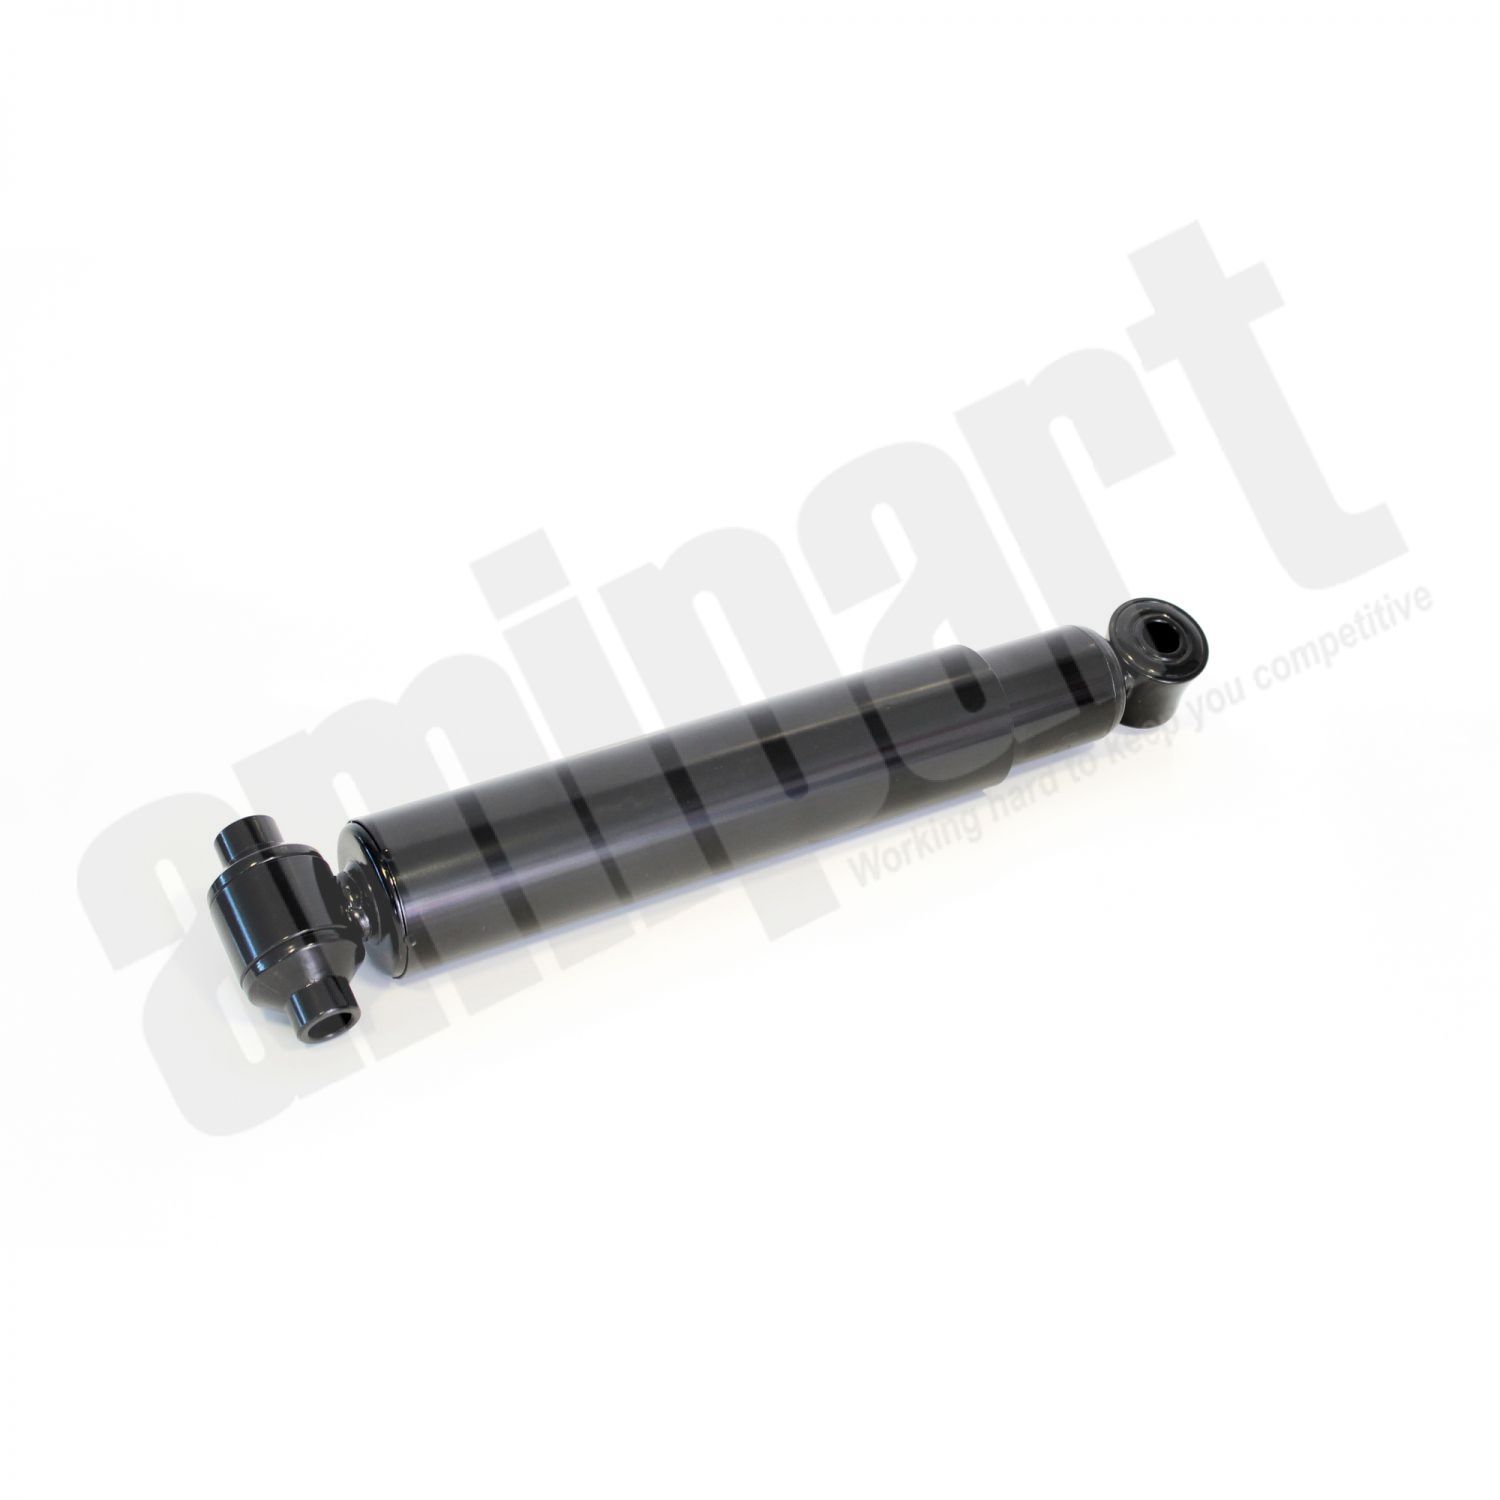 Amipart - SCANIA 5/6 SHOCK ABSORBER